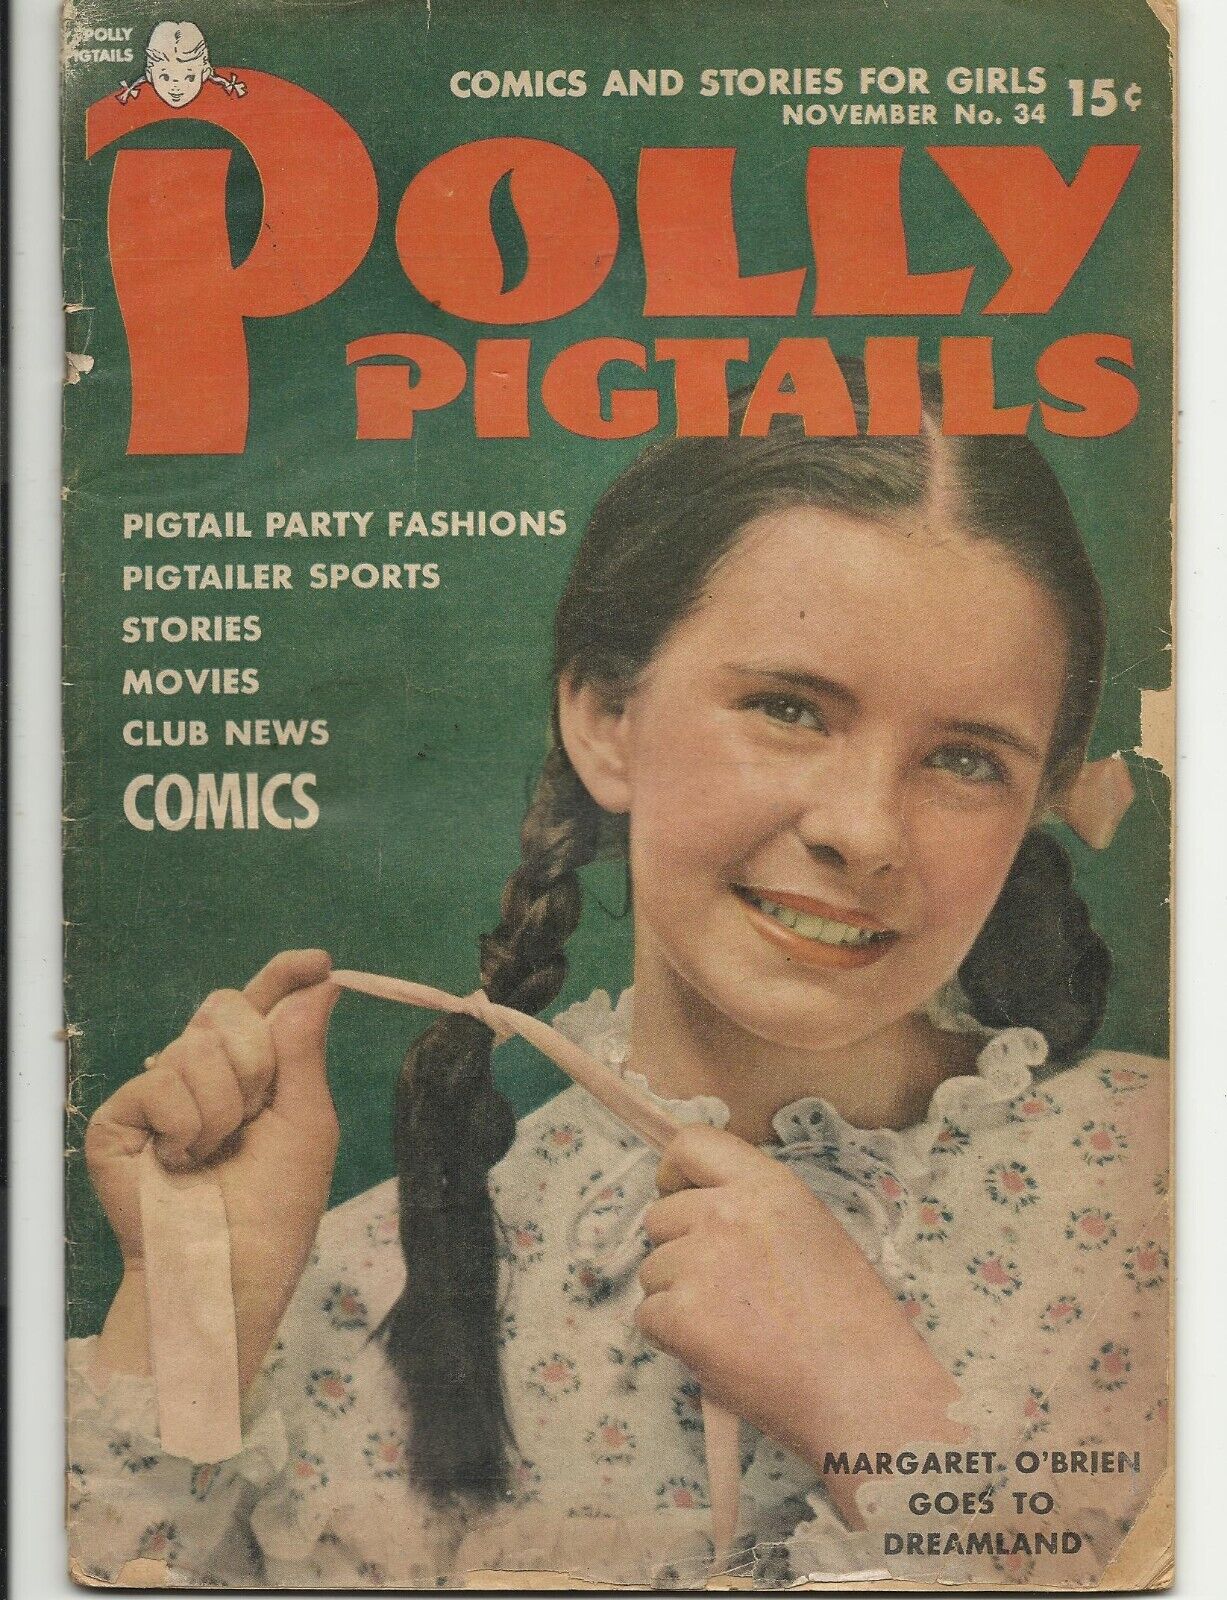 Polly Pigtails #34 - 1st series - Thanksgiving Issue - photo cover - GD 2.0